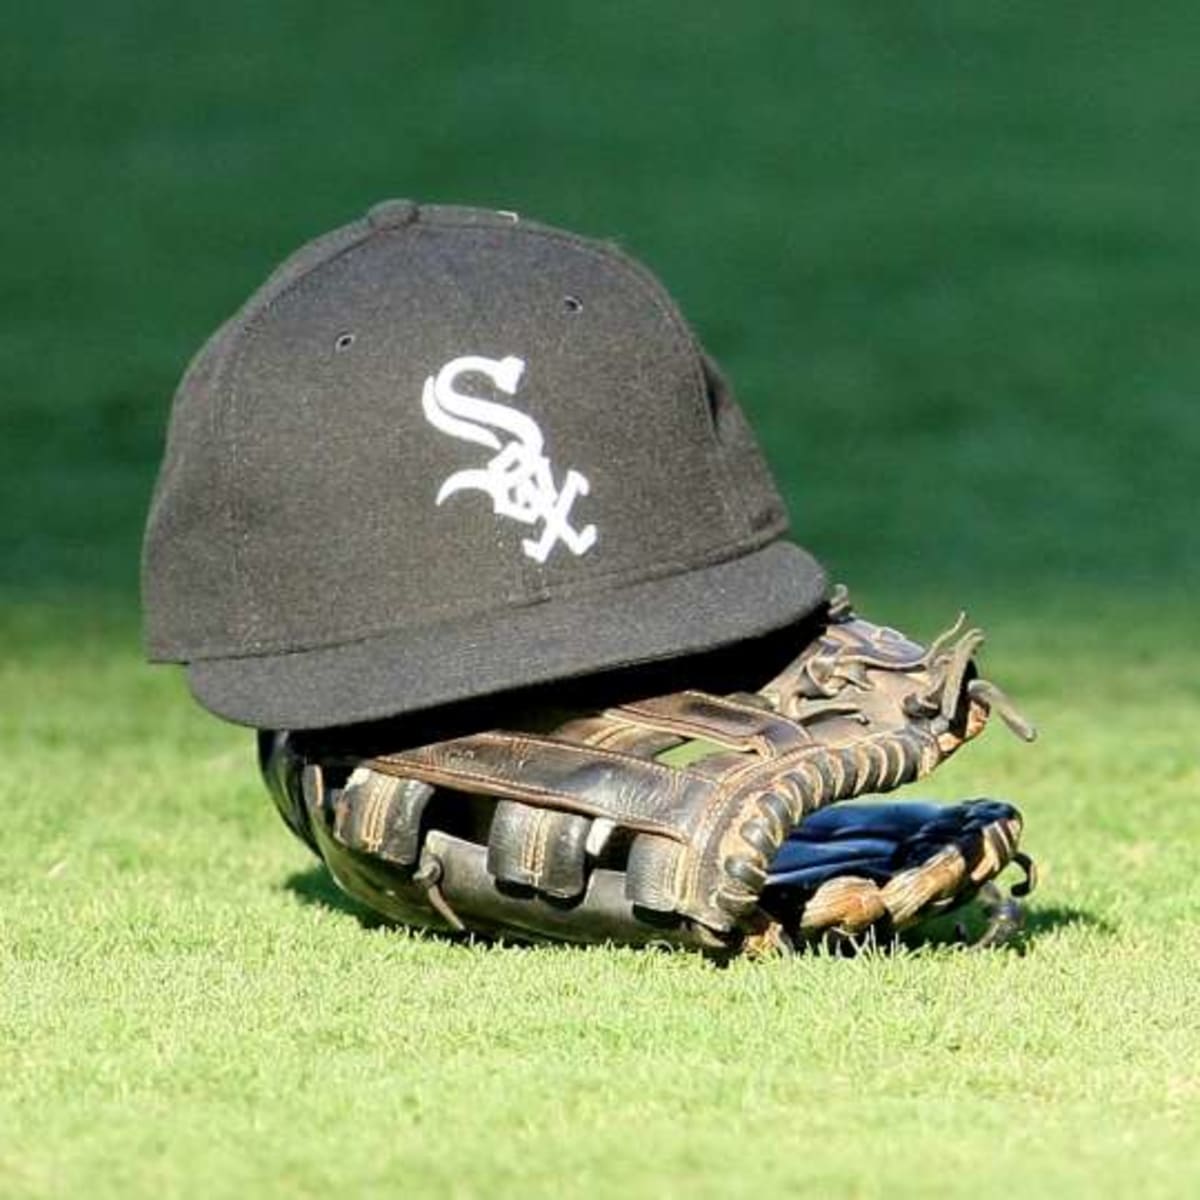 Straight Outta Compton has the wrong White Sox hat - Sports Illustrated